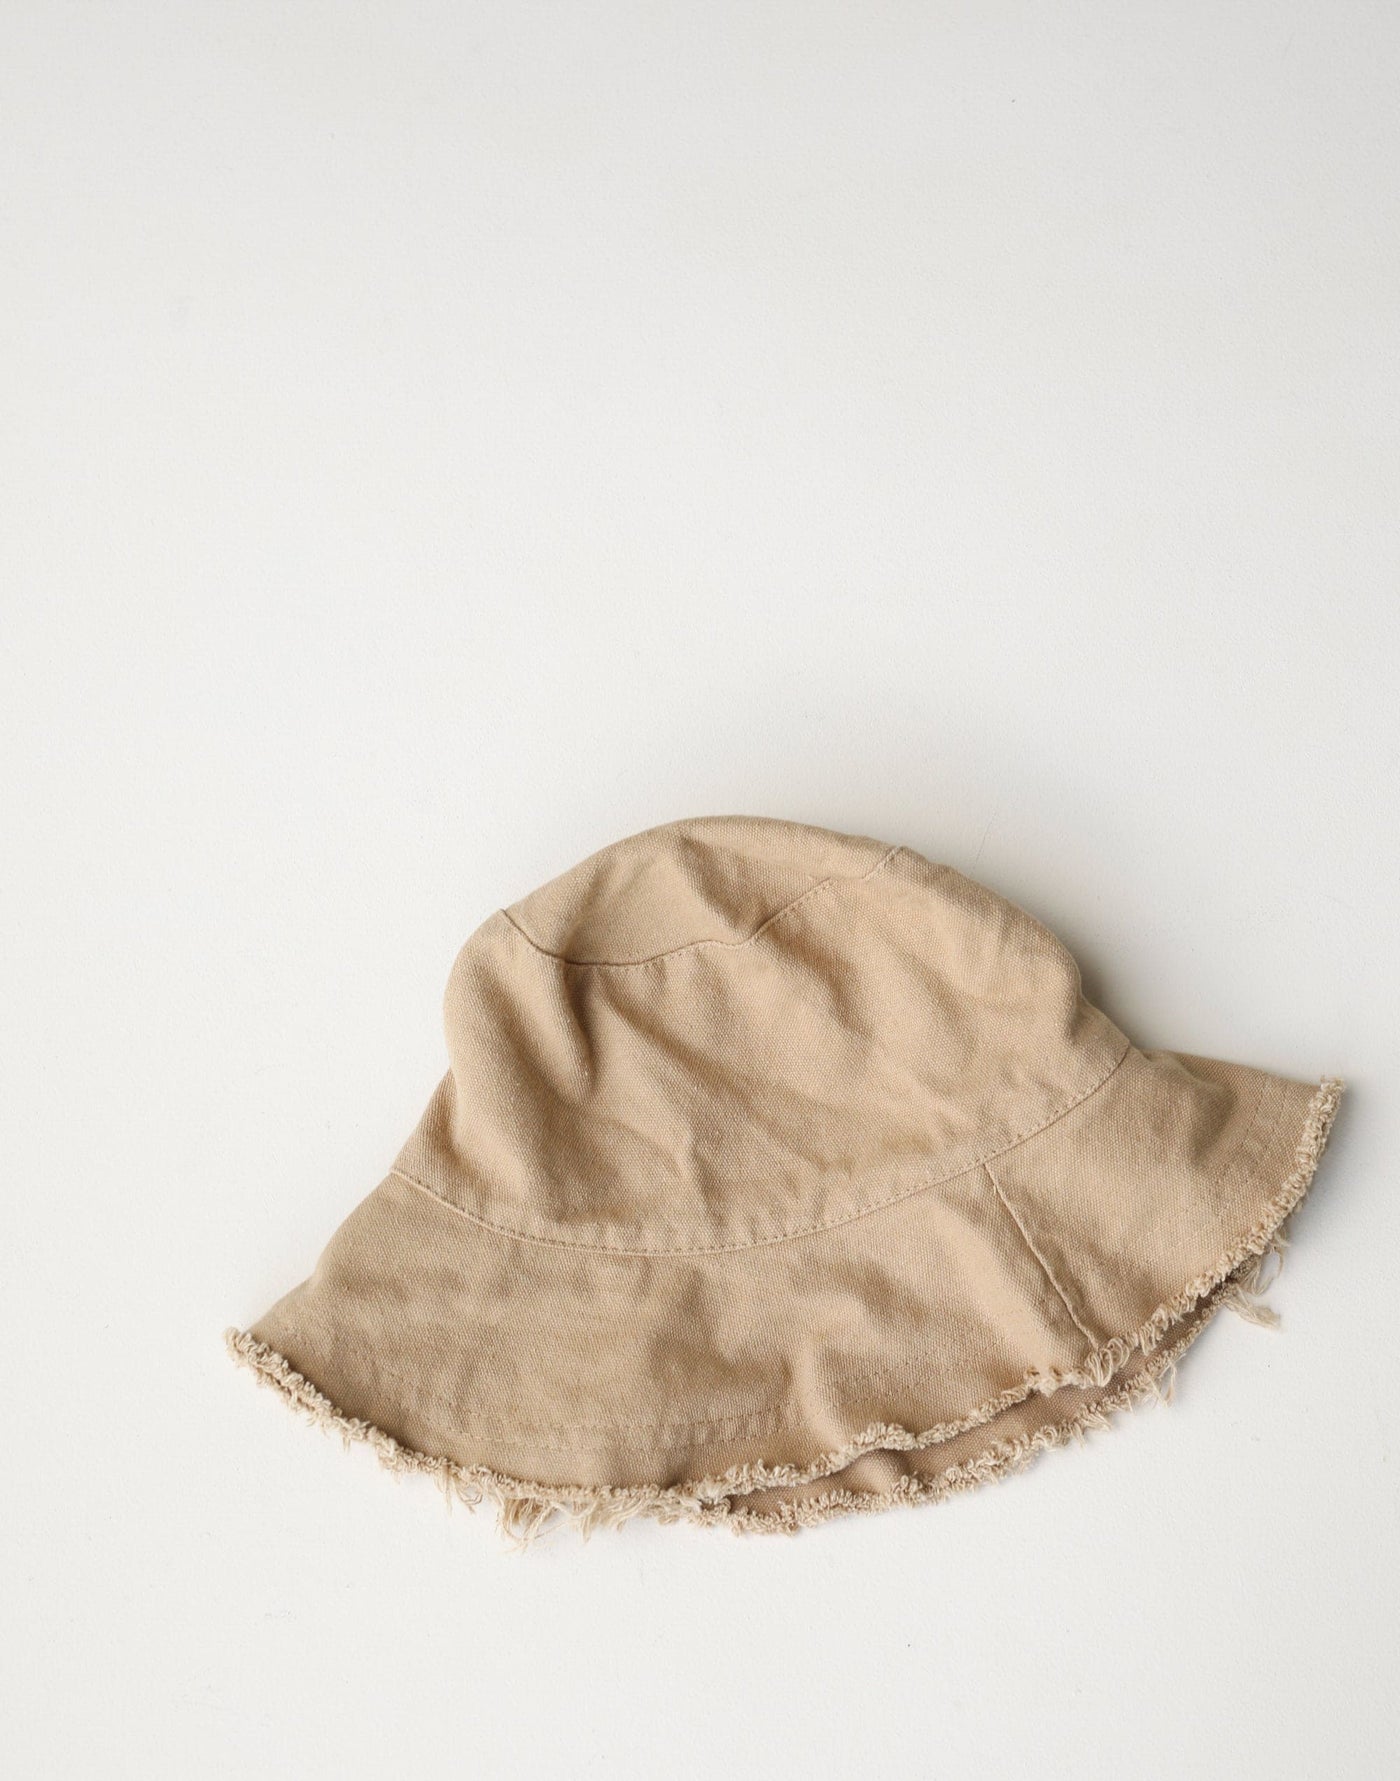 Leilani Bucket Hat (Caramel) - Cotton Frayed Edge Bucket Hat - Women's Accessories - Charcoal Clothing